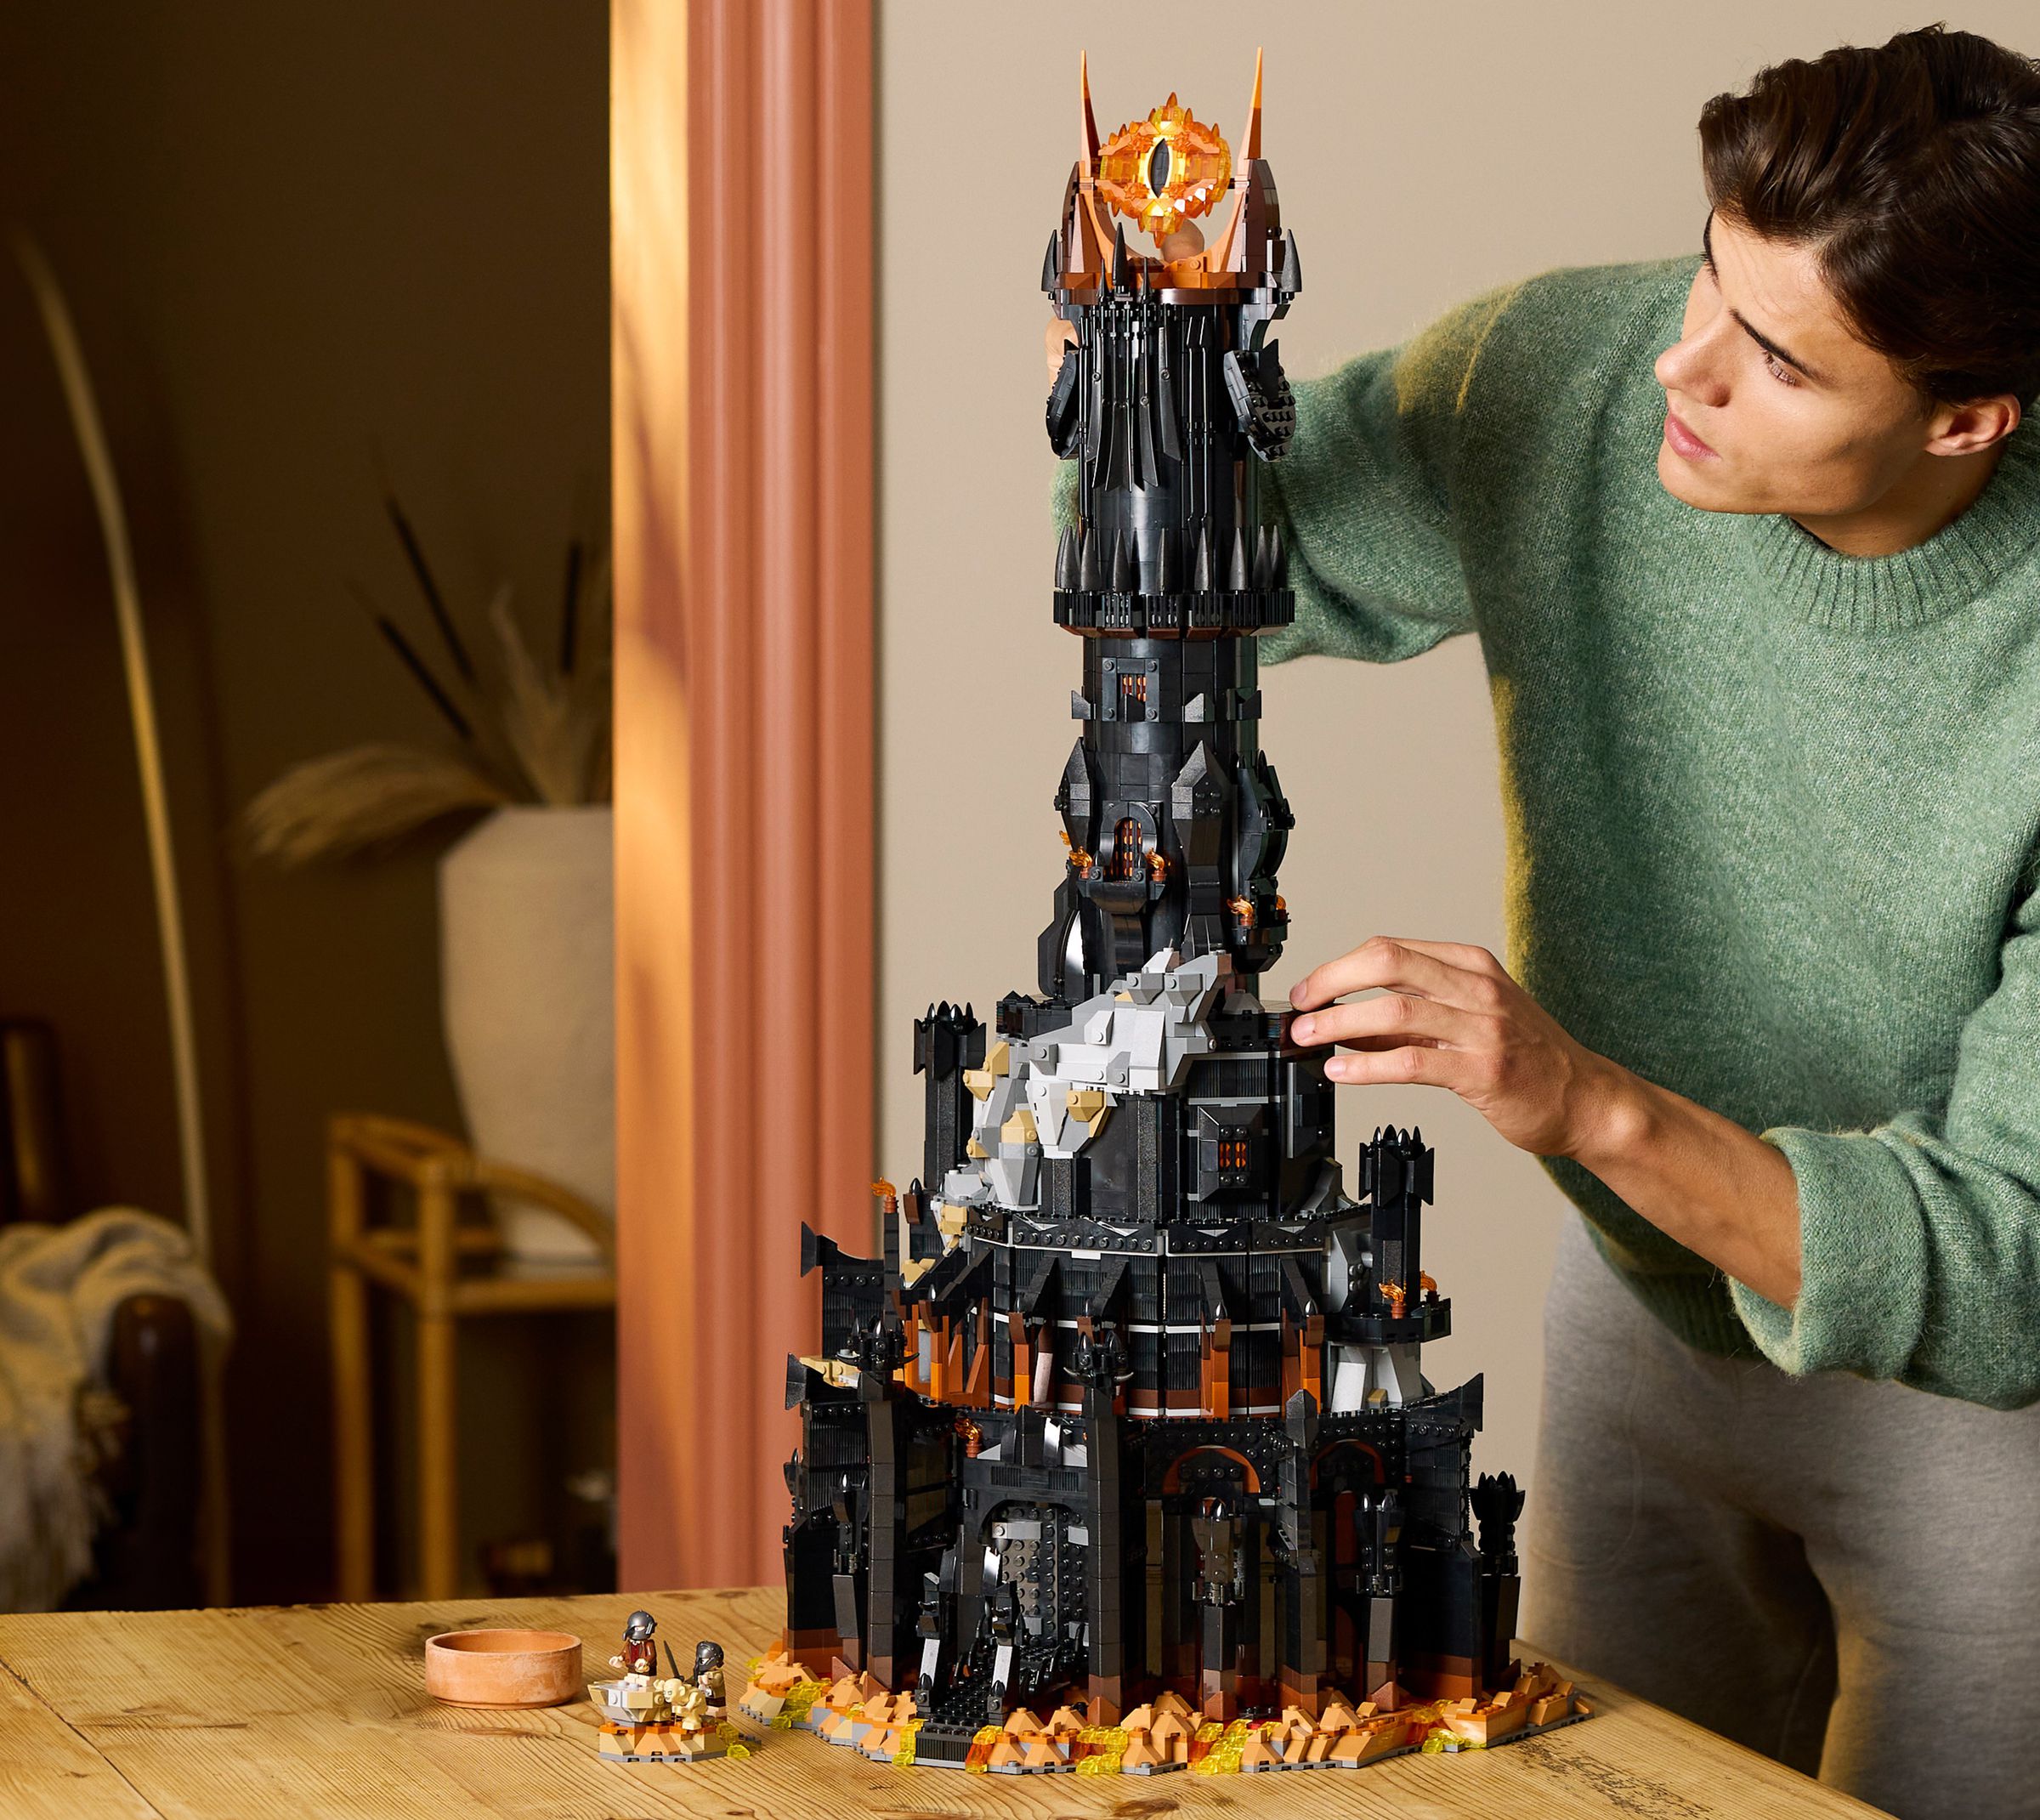 A person stands next to a black tower made of Lego bricks with a giant flaming eye on top